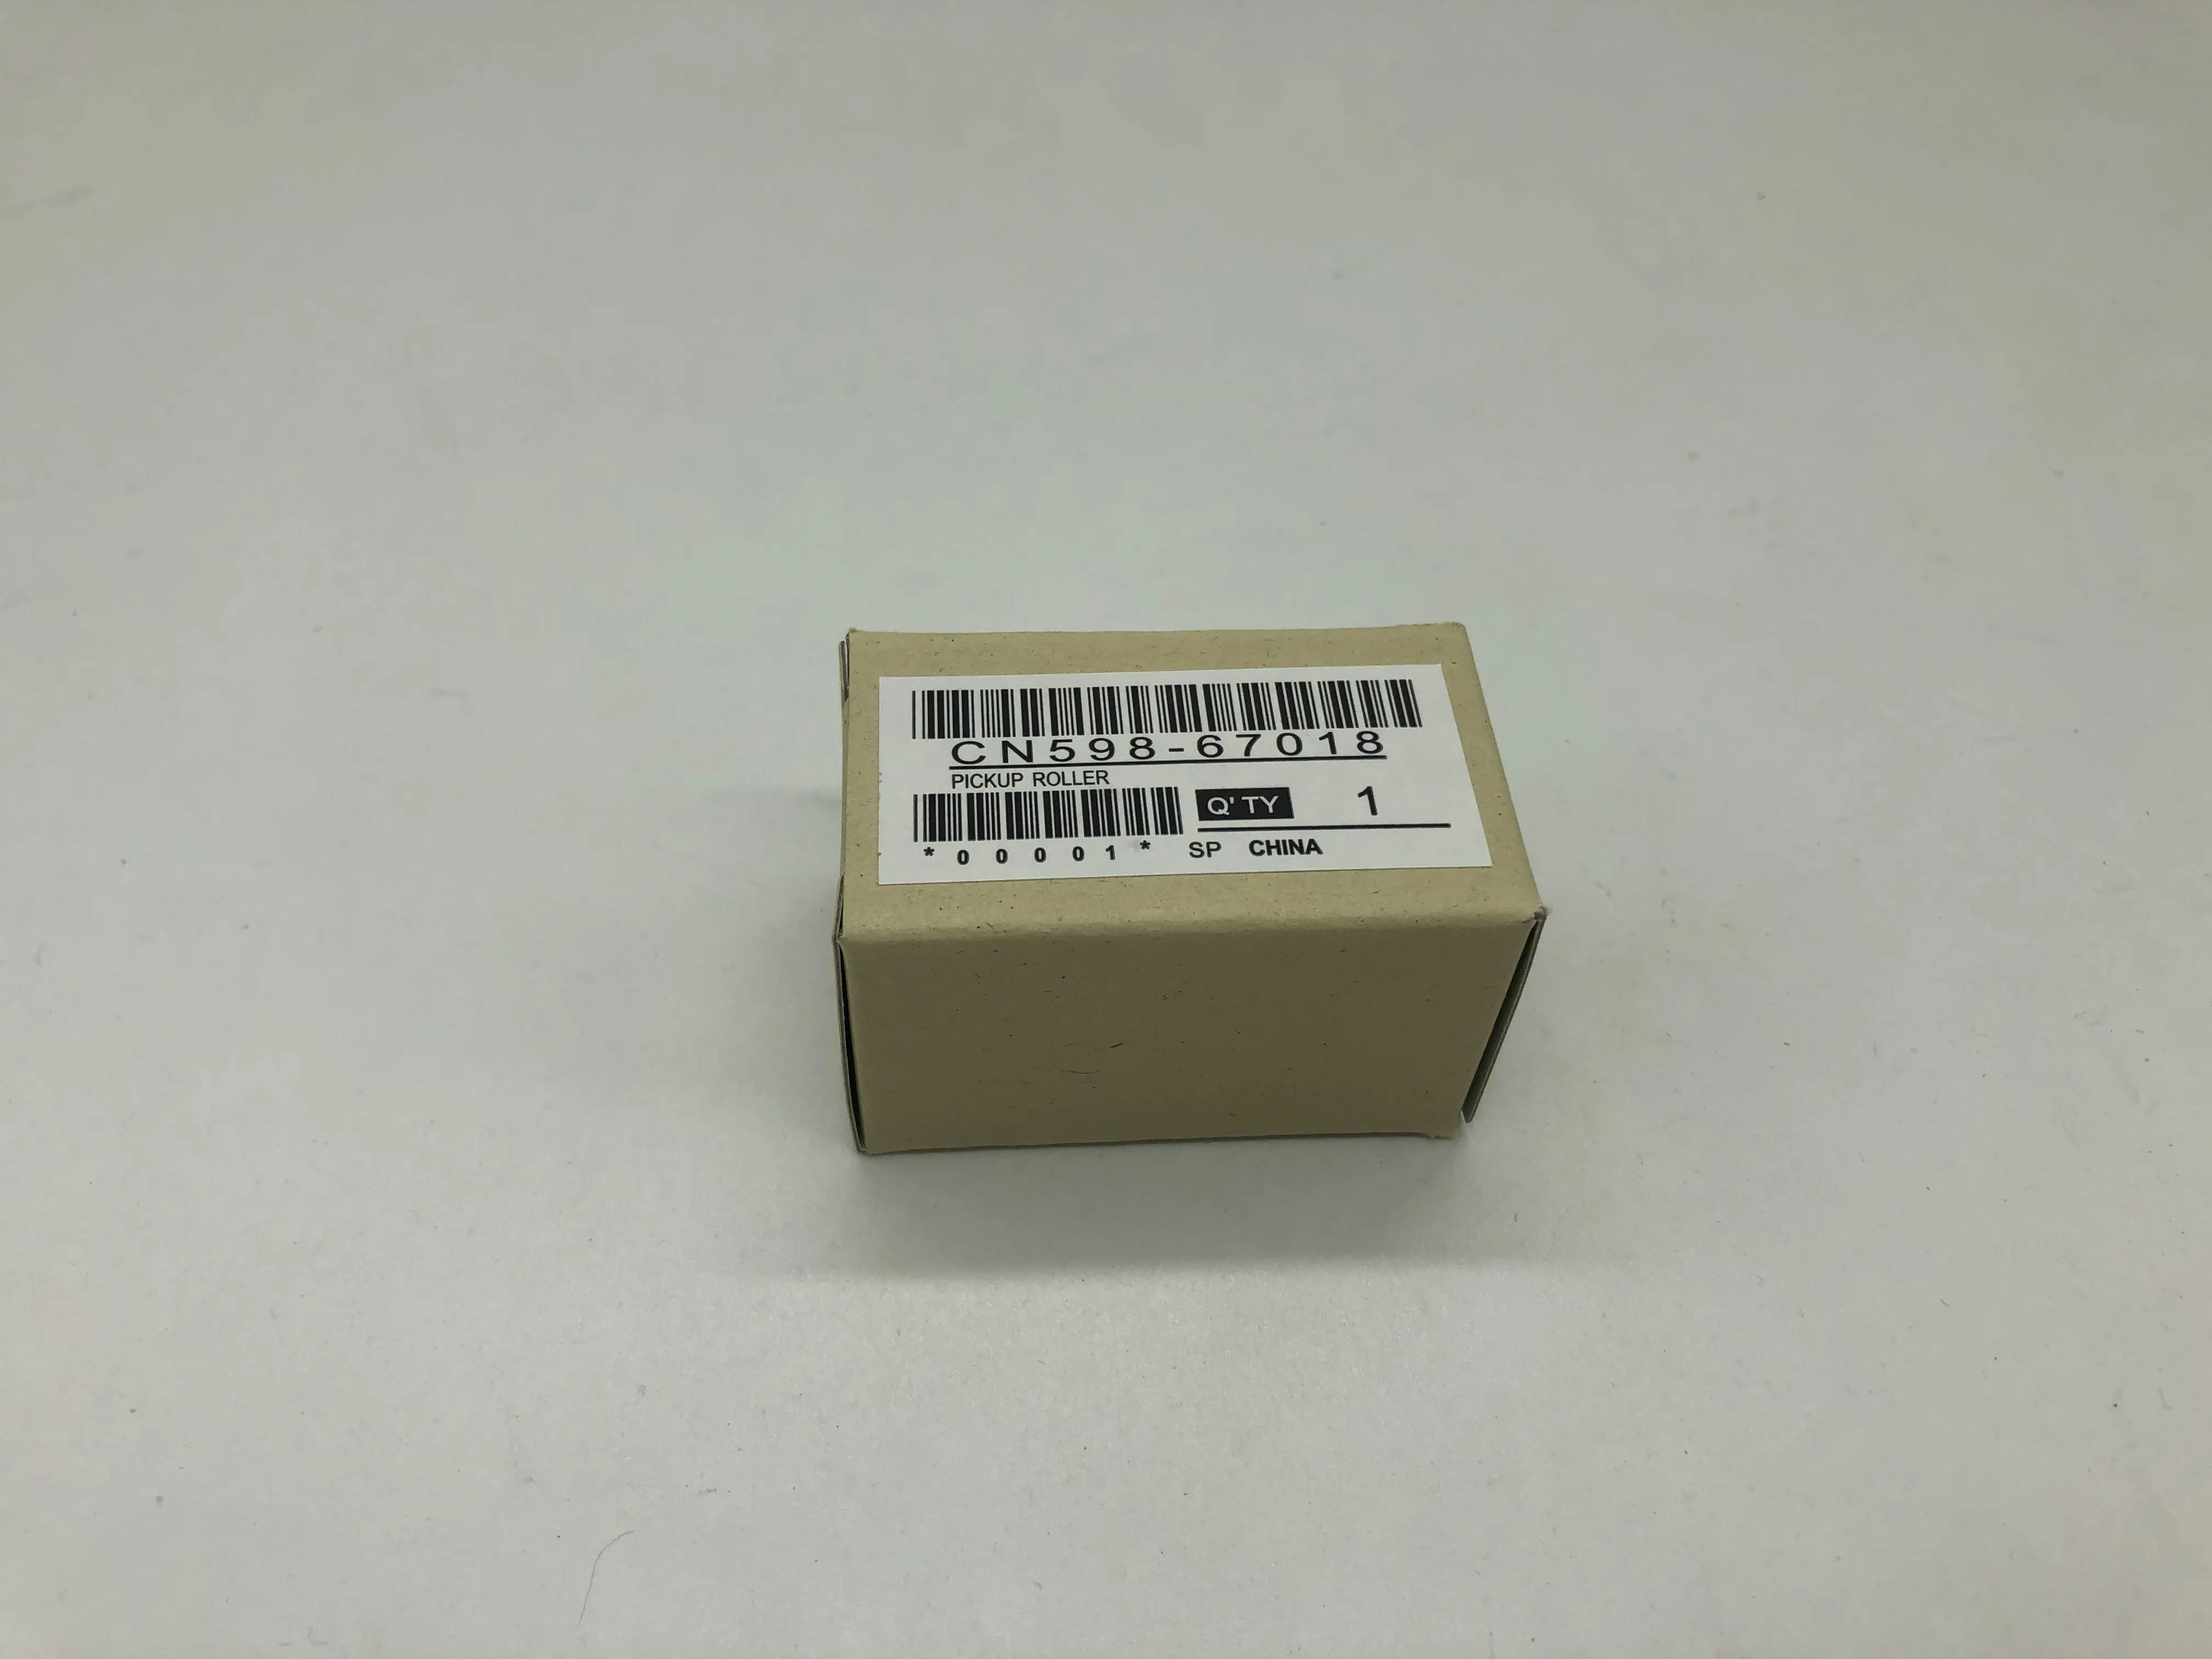 Pick up roller CN598-67018 for HP Pro 8100 8210 8600 8610 8620 8625 8630  8700 8710 8740 8720 7740 7730 7720